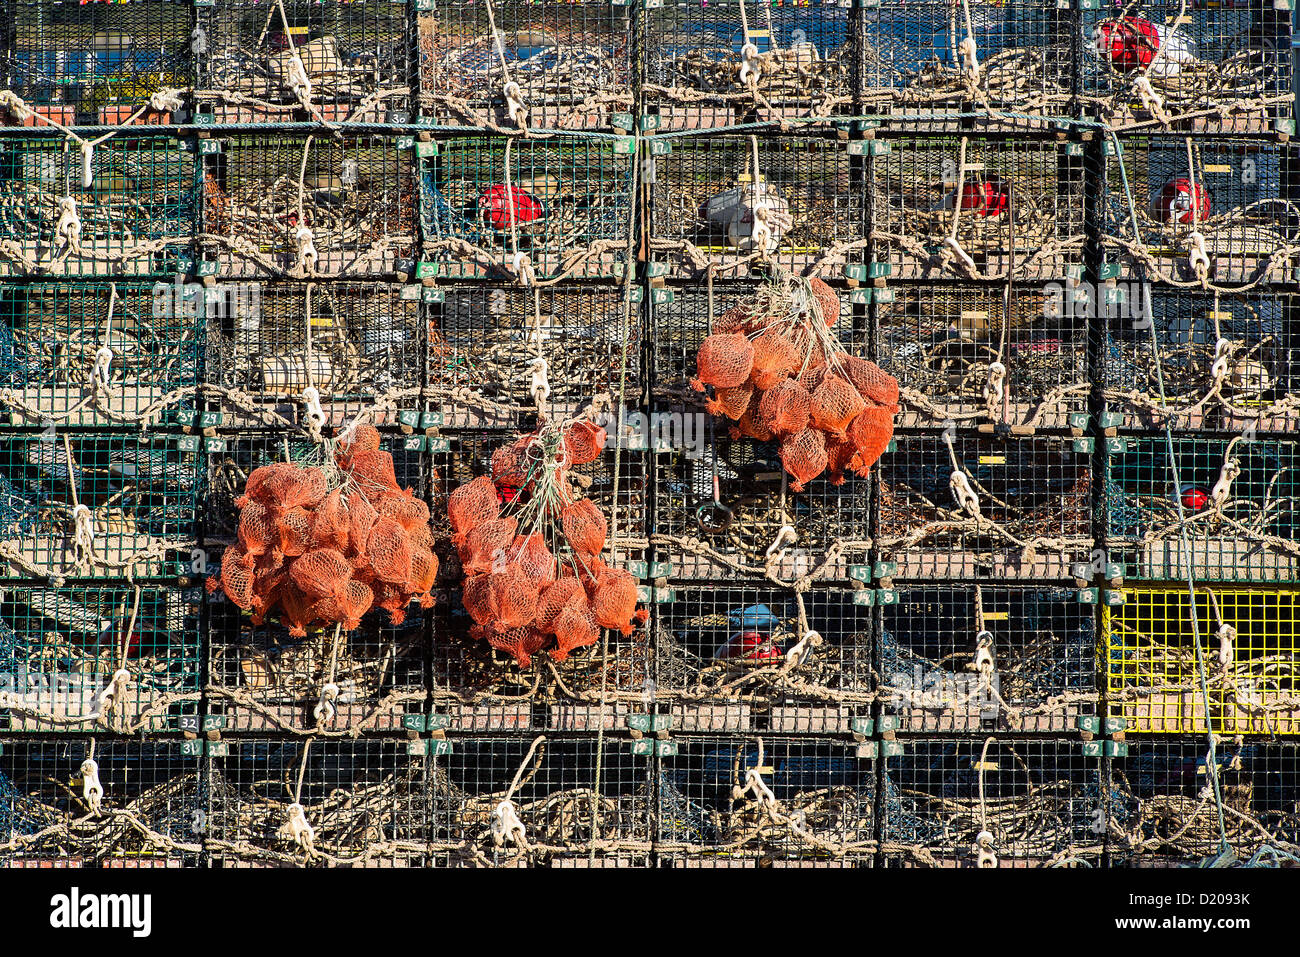 Colorful stack of lobster traps, Jonesport, Maine, USA Stock Photo